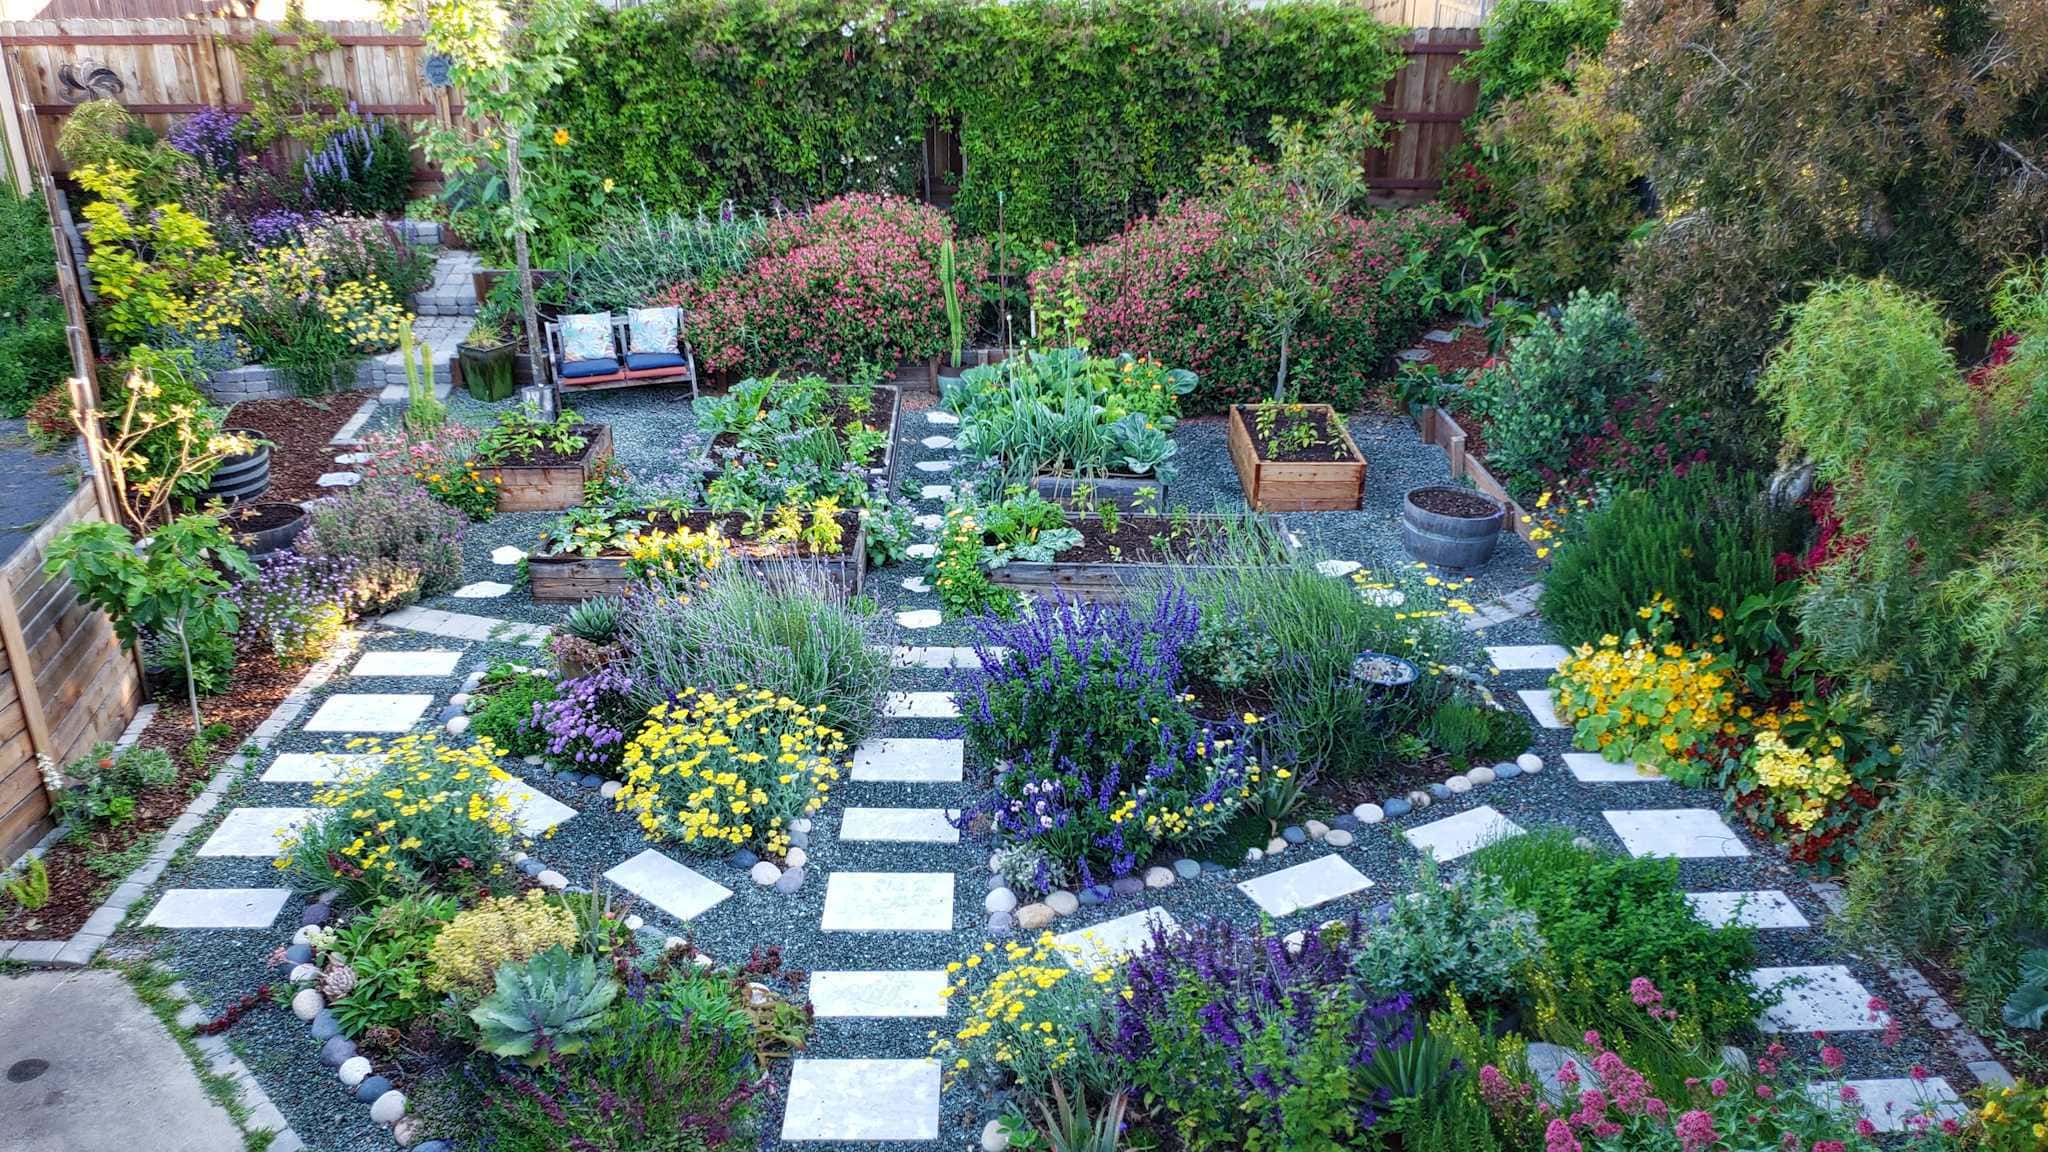 A view from the roof of a house, looking down upon and neatly laid out front yard garden. There are four small pollinator sections in the front with various perennials and raised garden beds laid out in the back section of the yard. There is gravel pathways lined with stone pavers throughout. The perimeter of the yard is lined with various trees, perennials, annuals, and vines. Colors of the yard range from green, to purple, to pink, to yellow, and many shades in between. 